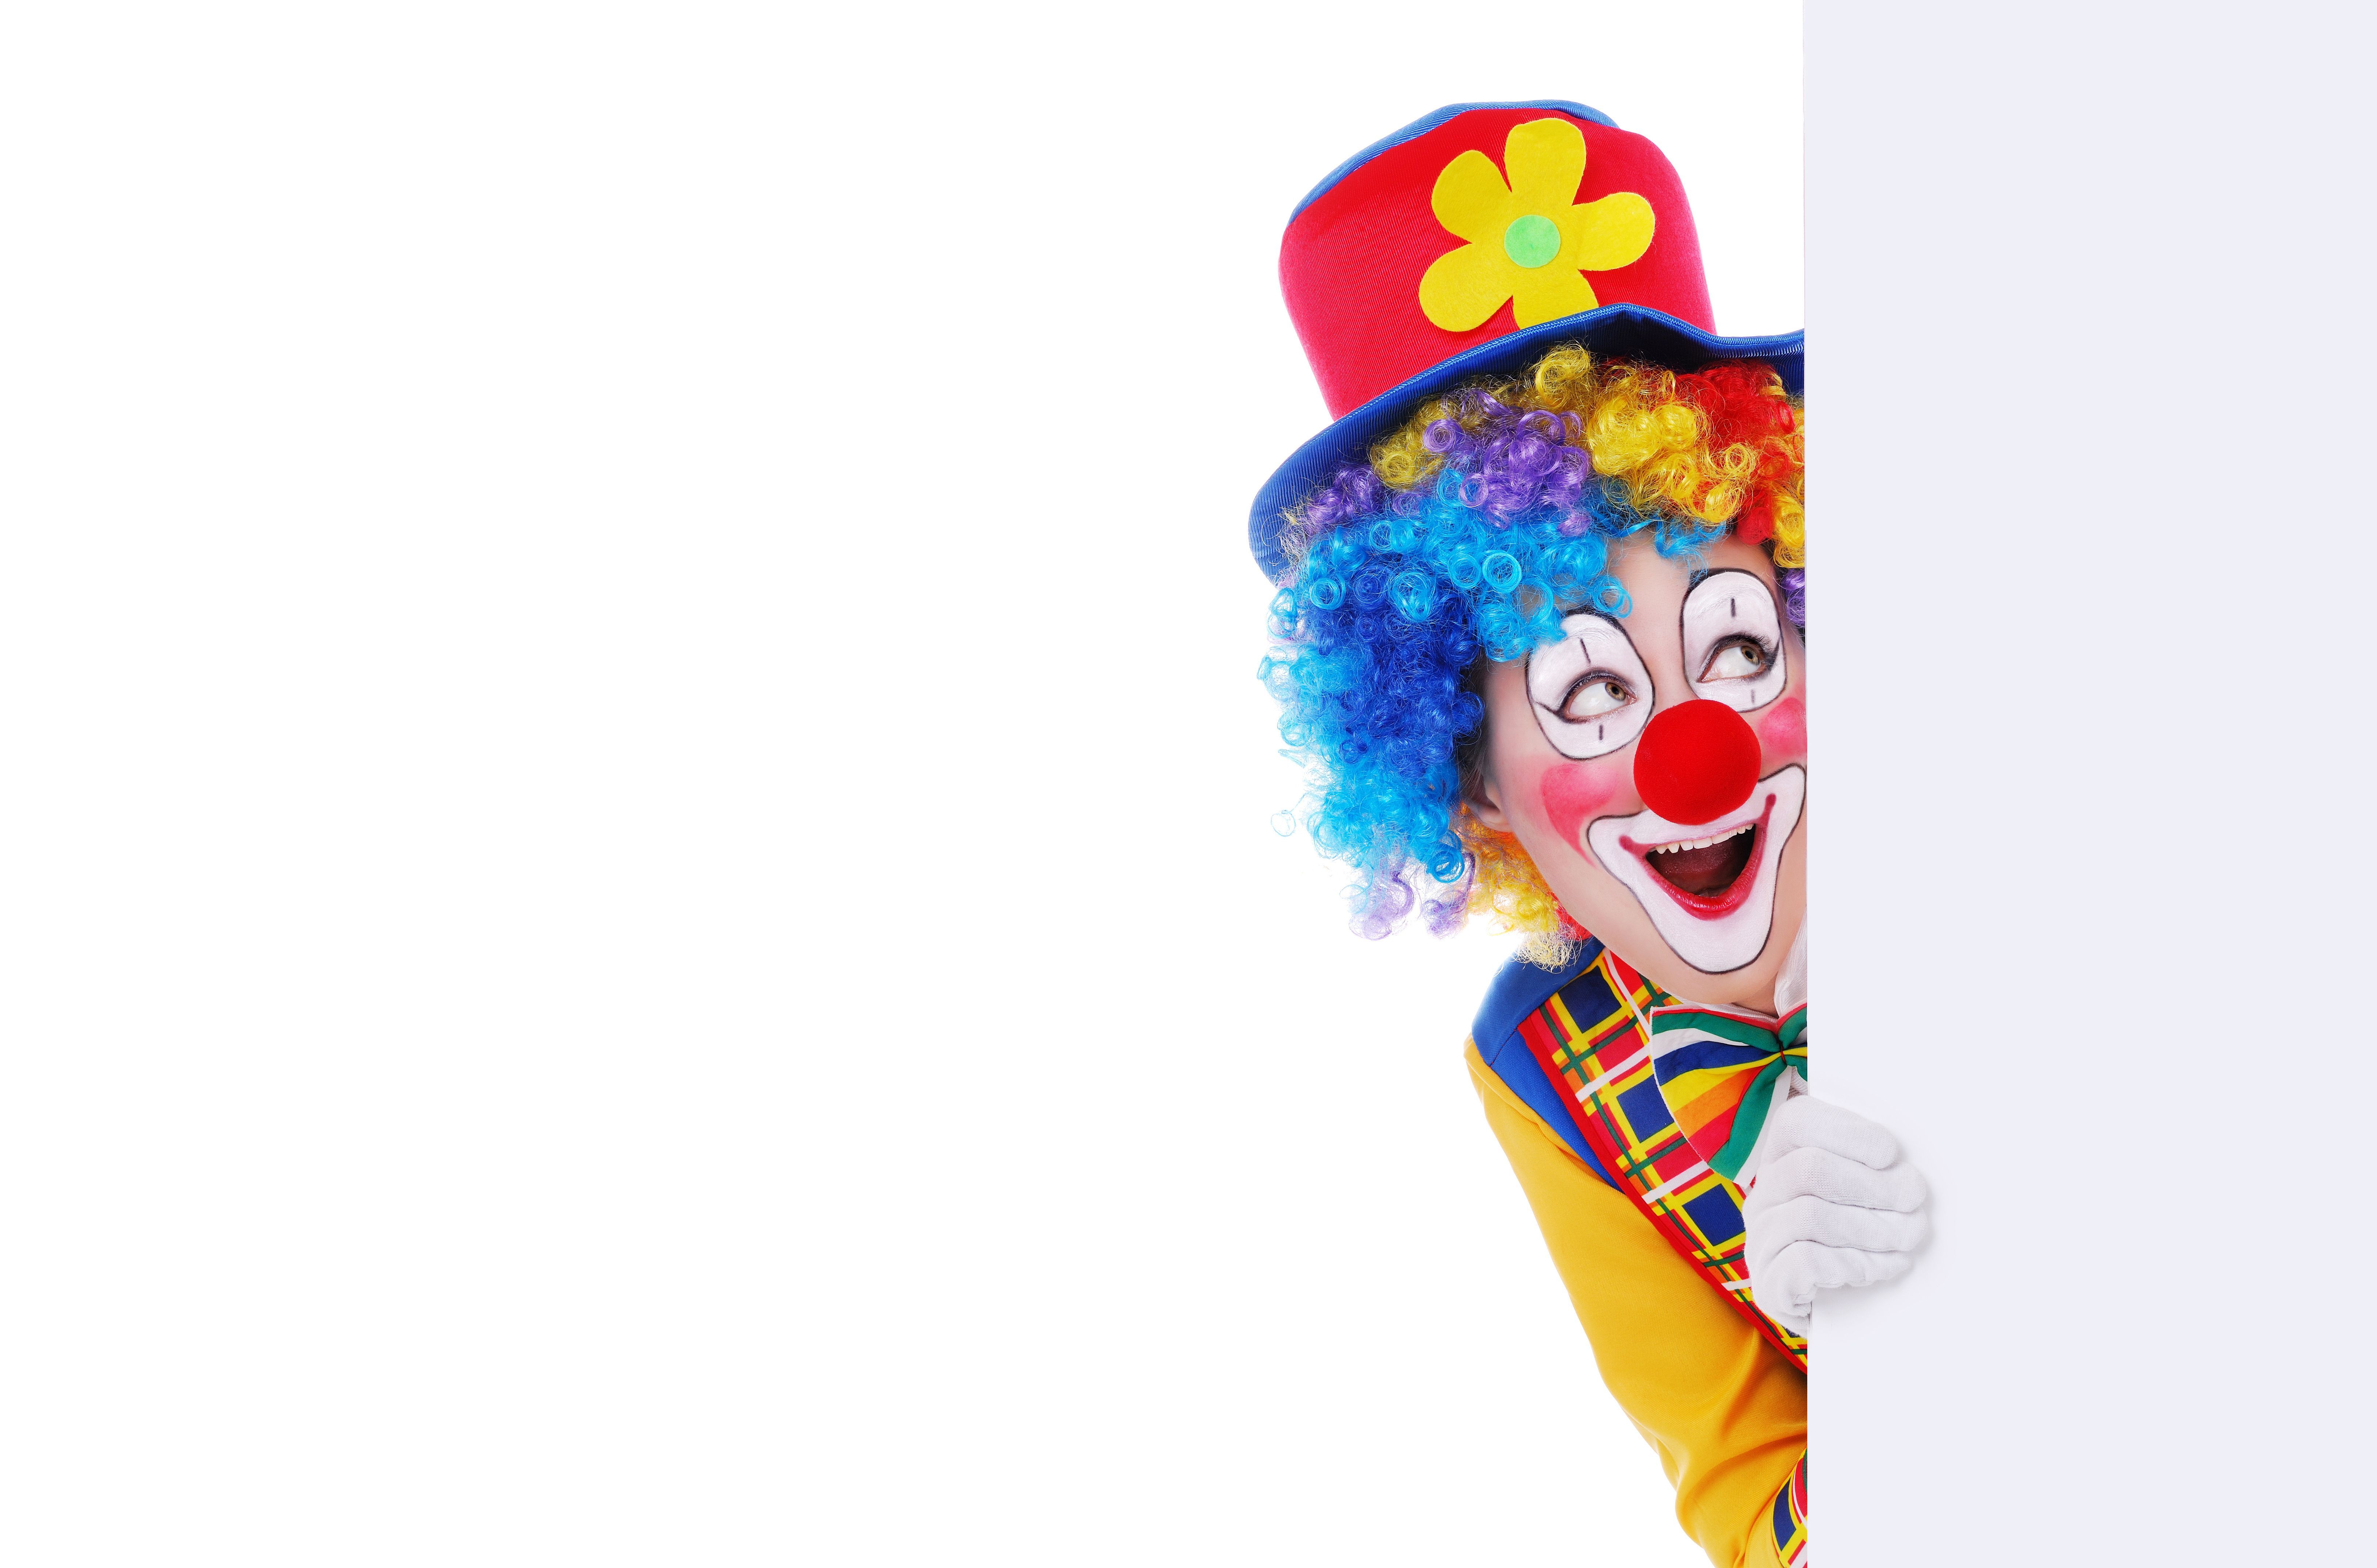 Funny clown wallpaper and image, picture, photo. Clown party, Clowns funny, Funny joker